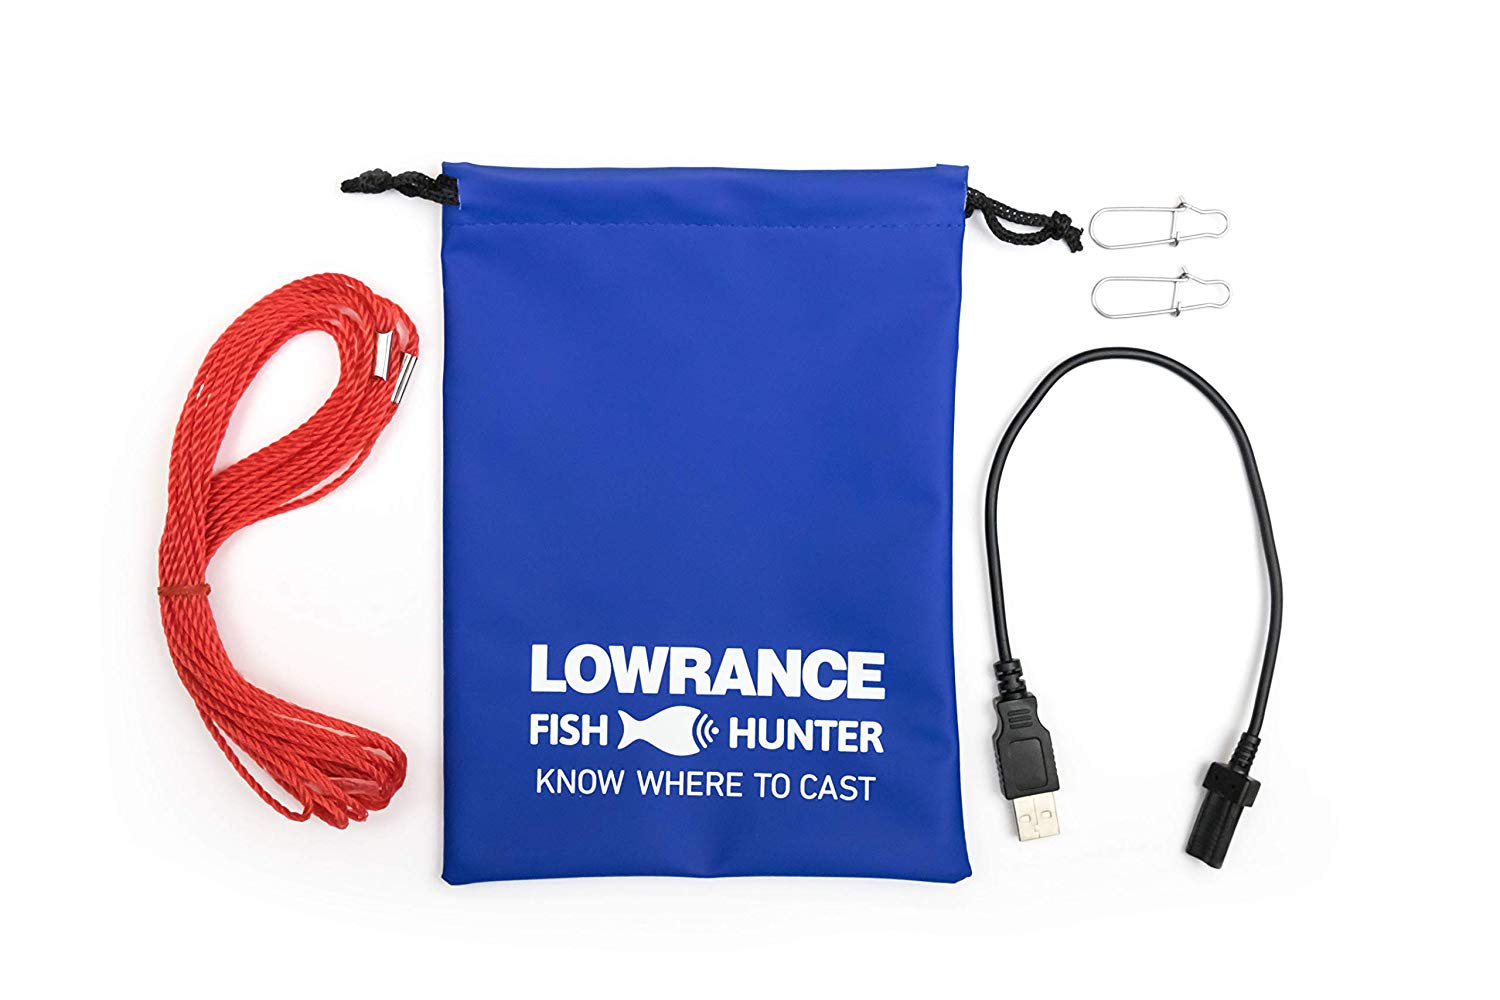 Lowrance FishHunter 3D - Portable Fishfinder Connects via WiFi to iOS and Android Devices - image 4 of 7